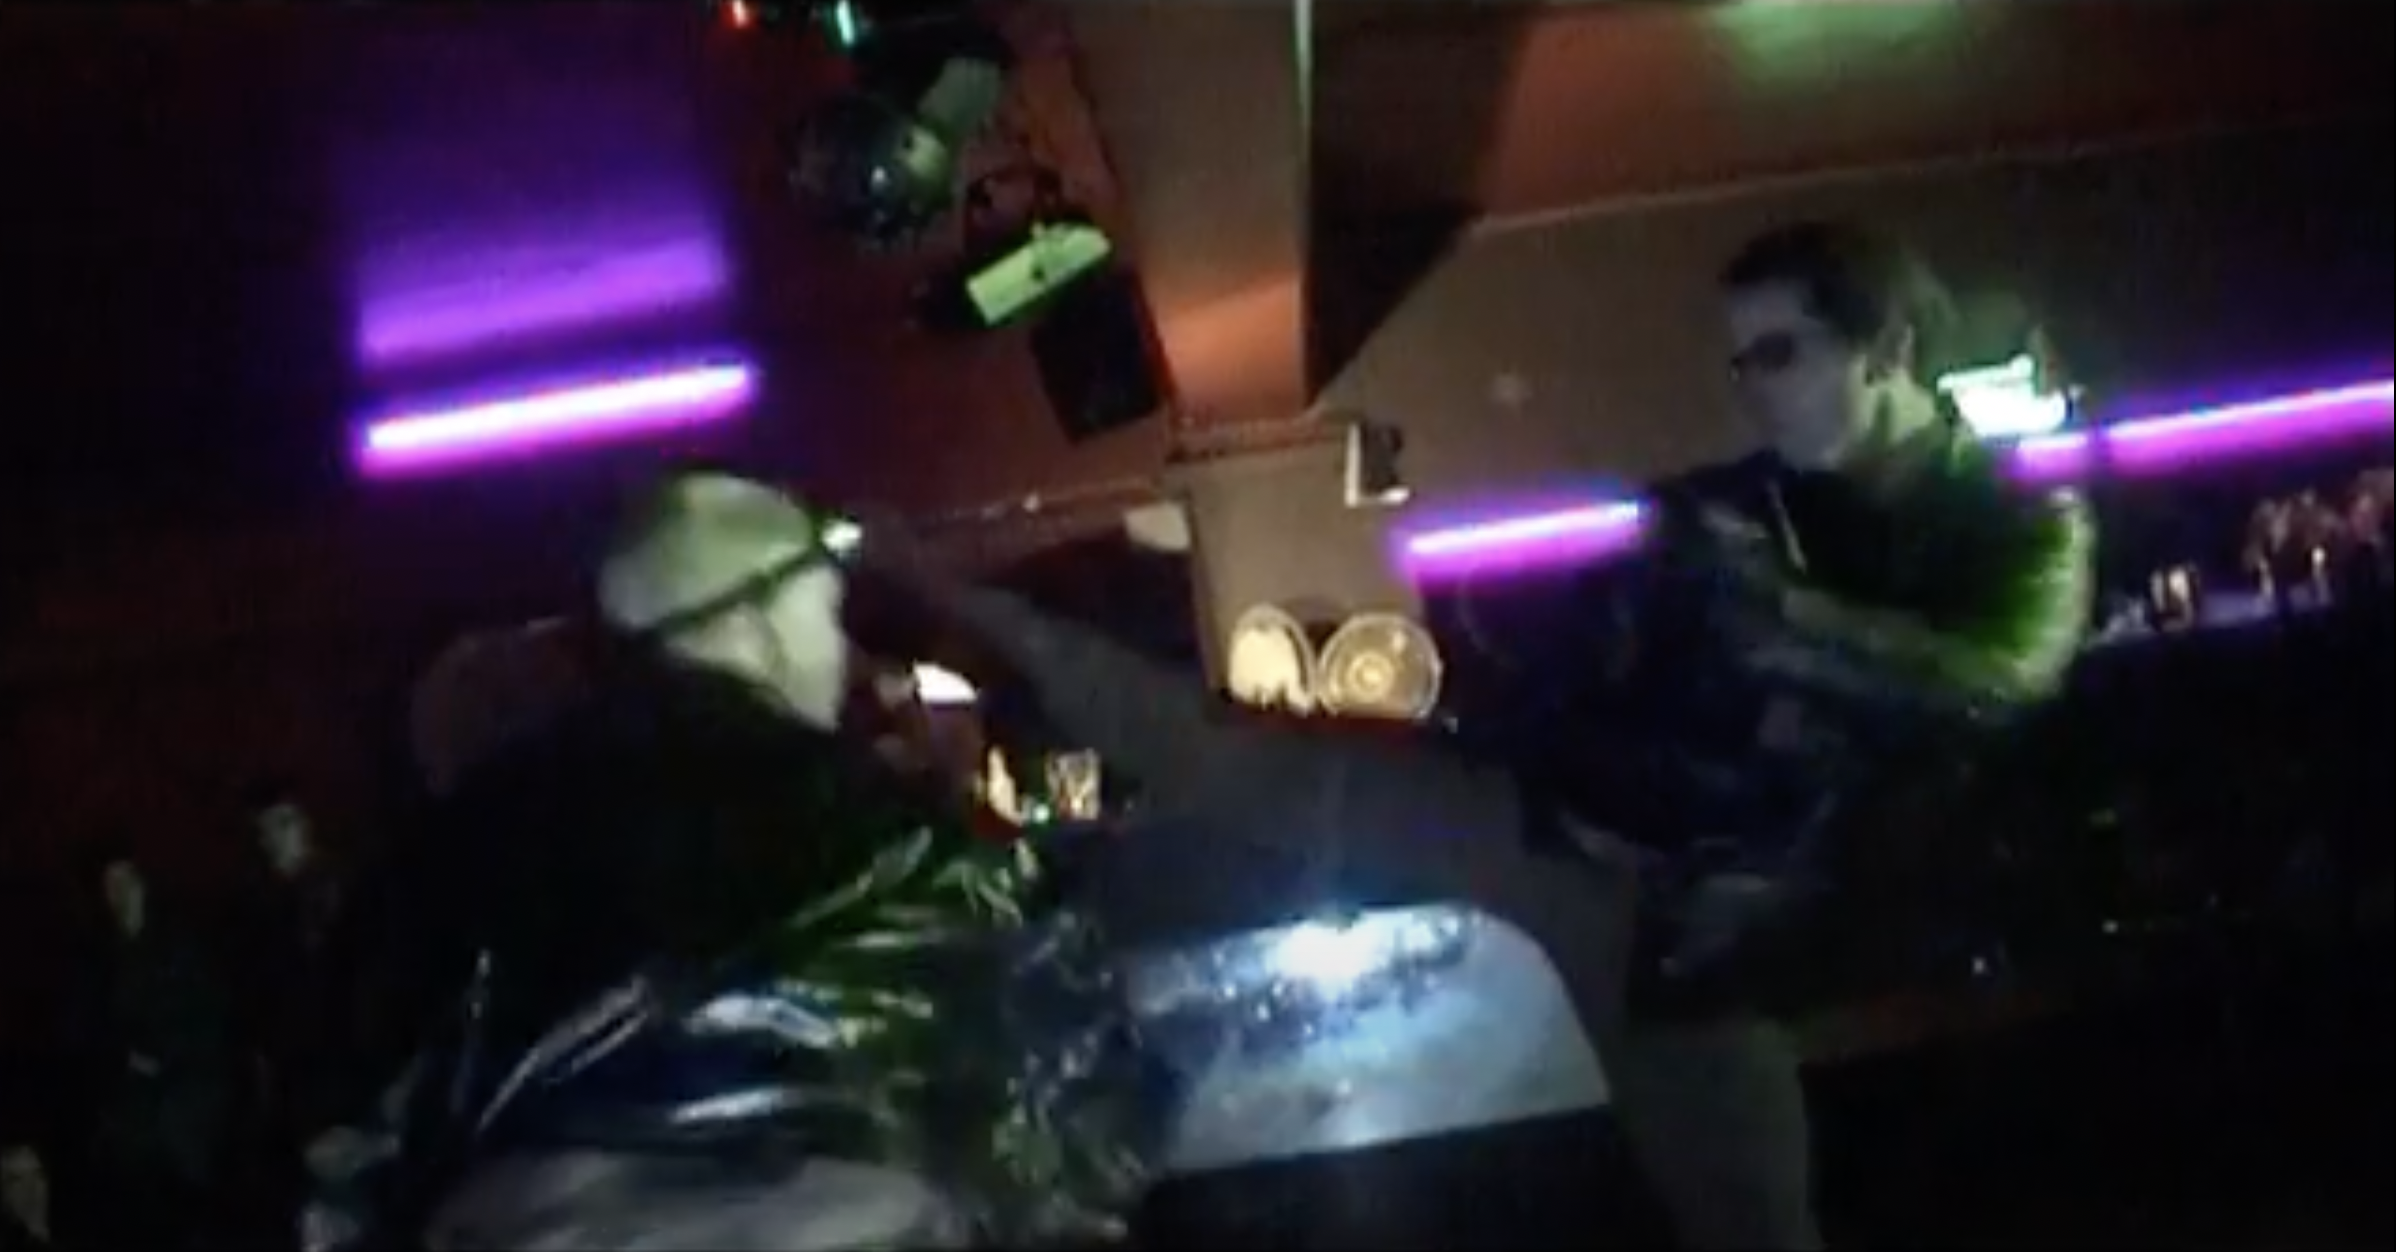 A screenshot from The Fanimatrix showing a man in sunglasses kicking someone in a nightclub with purple lights in the background.